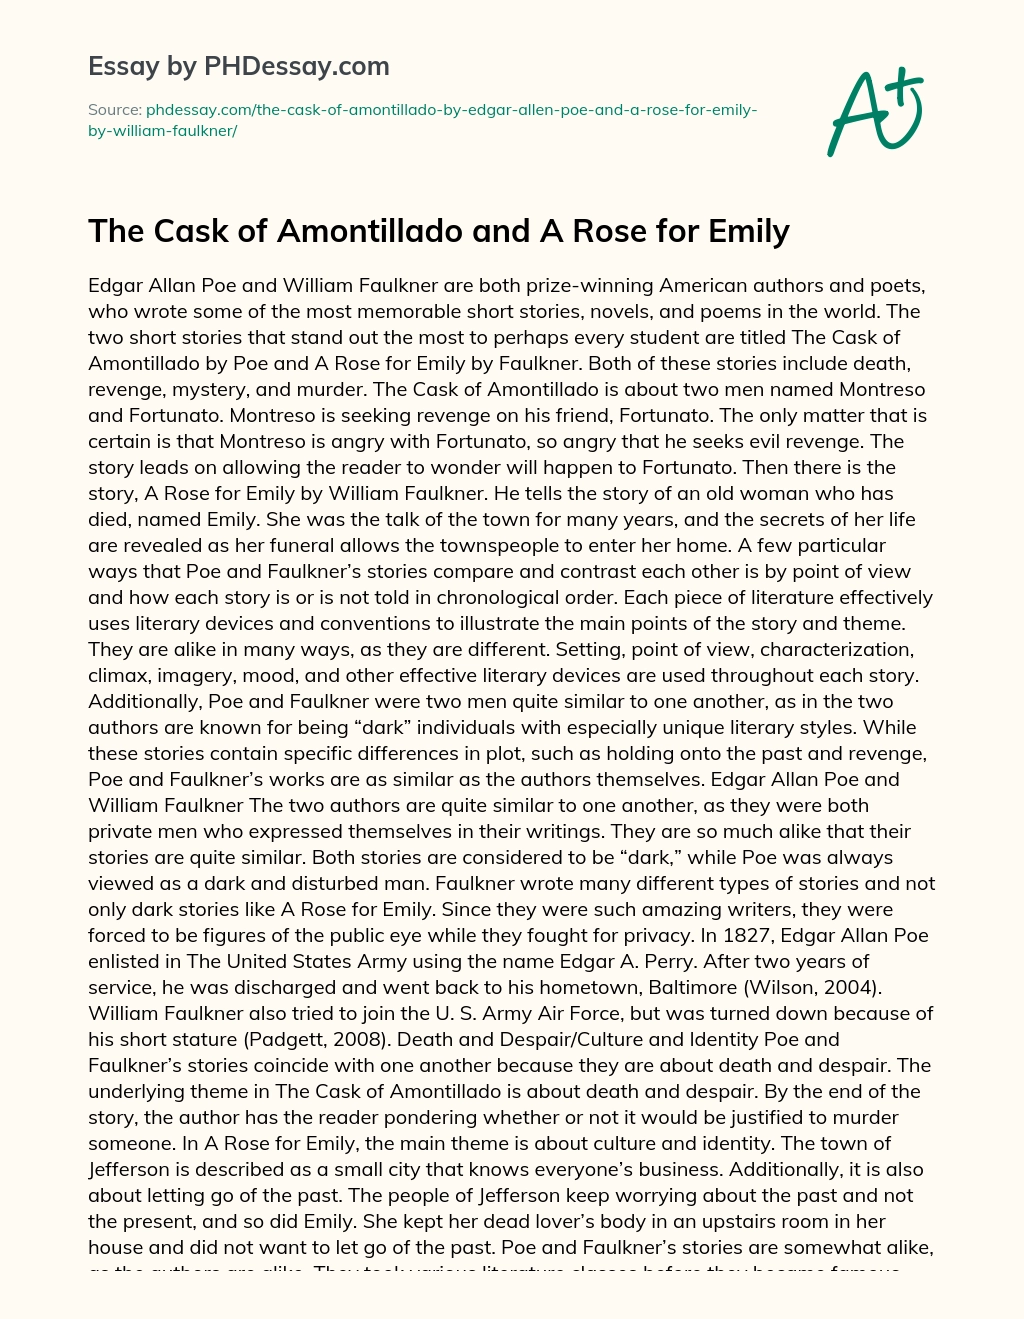 The Cask of Amontillado and A Rose for Emily essay